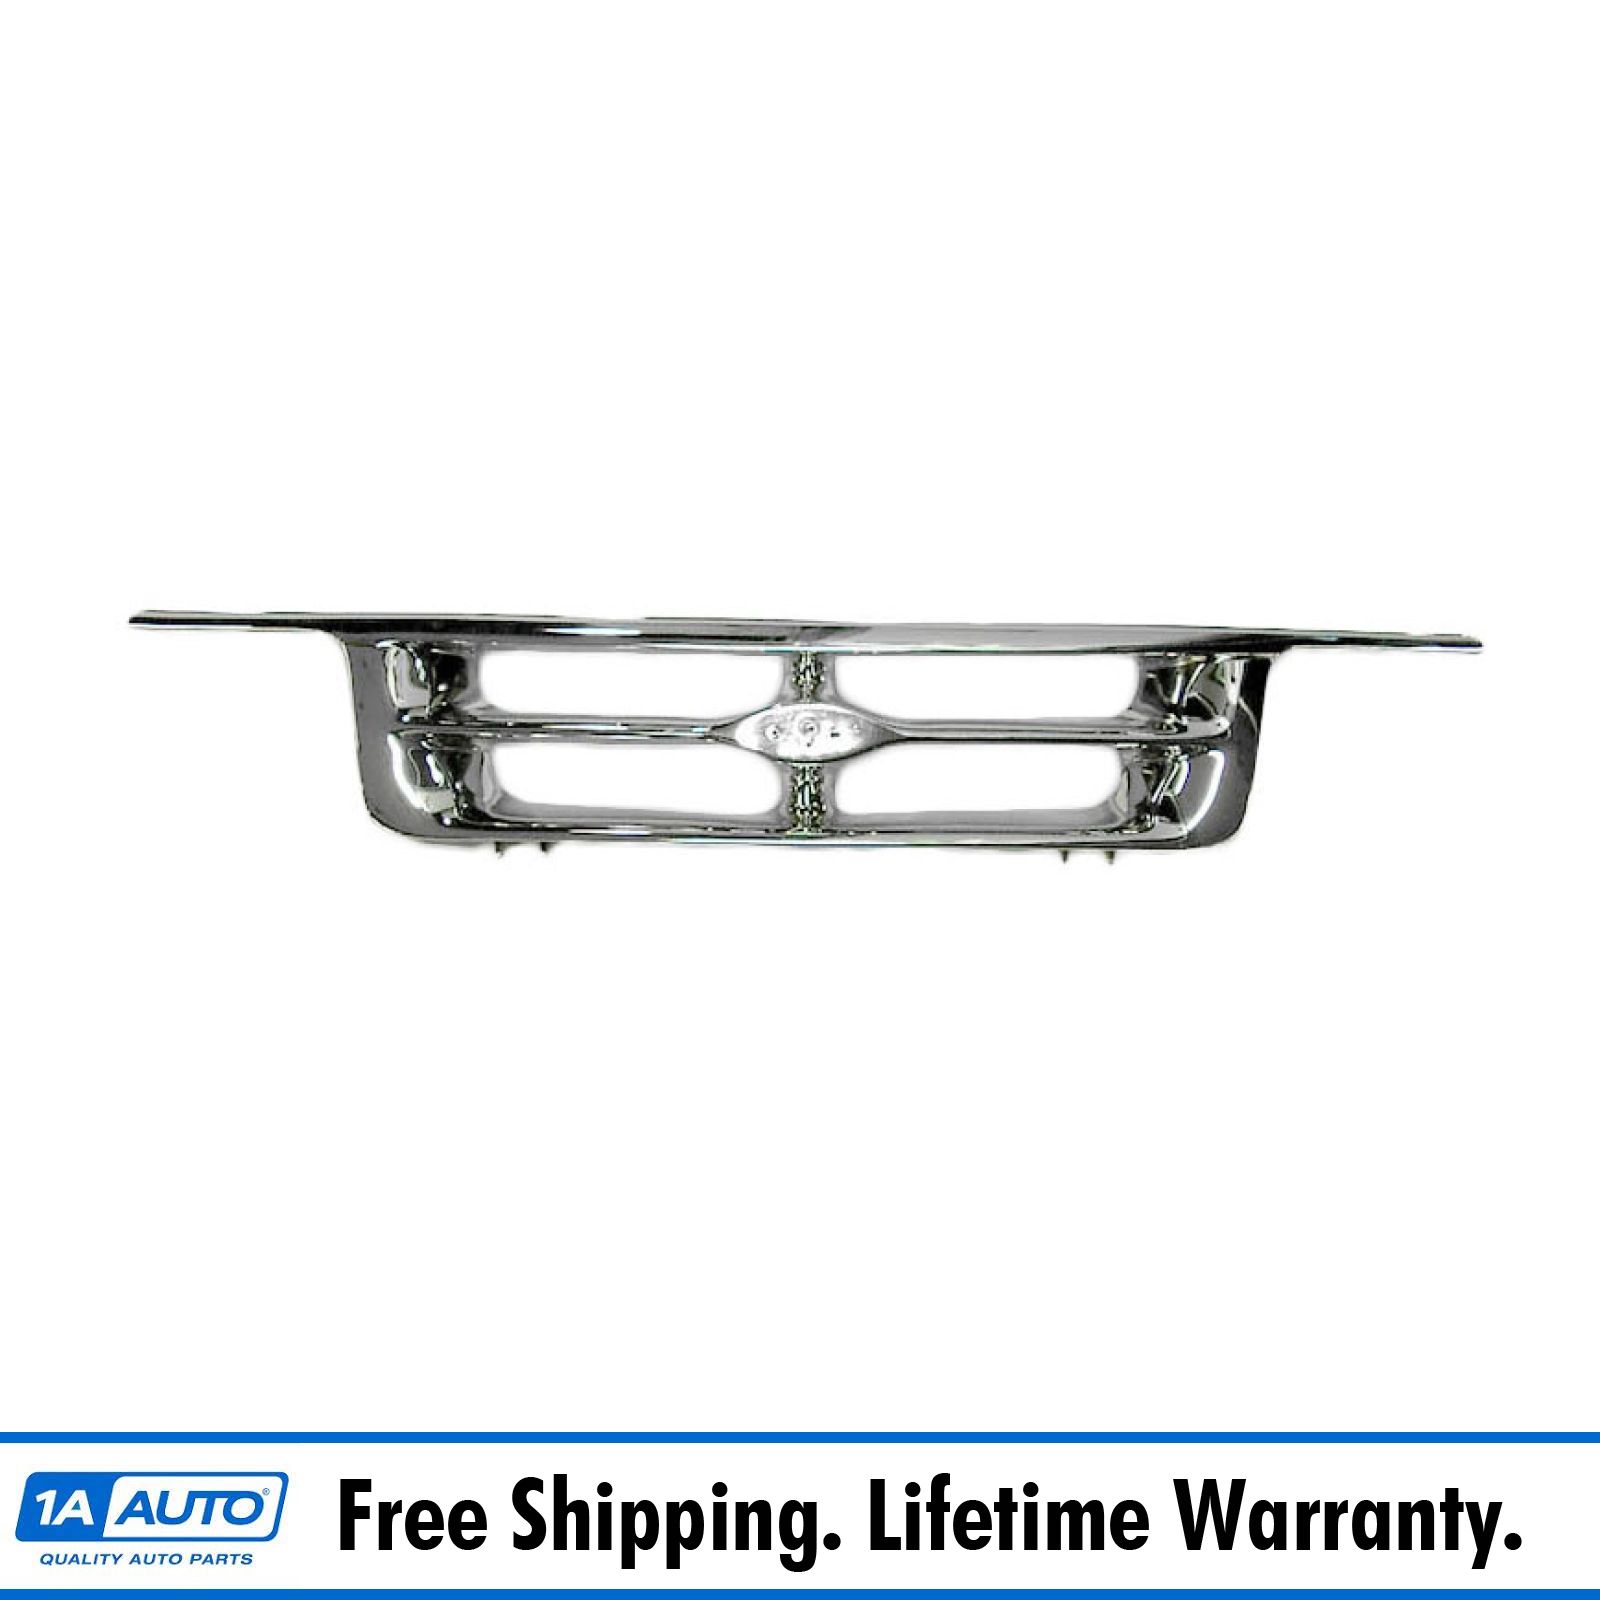 1995-1997 Ford Ranger Grille (Grill) 100% ALL CHROME